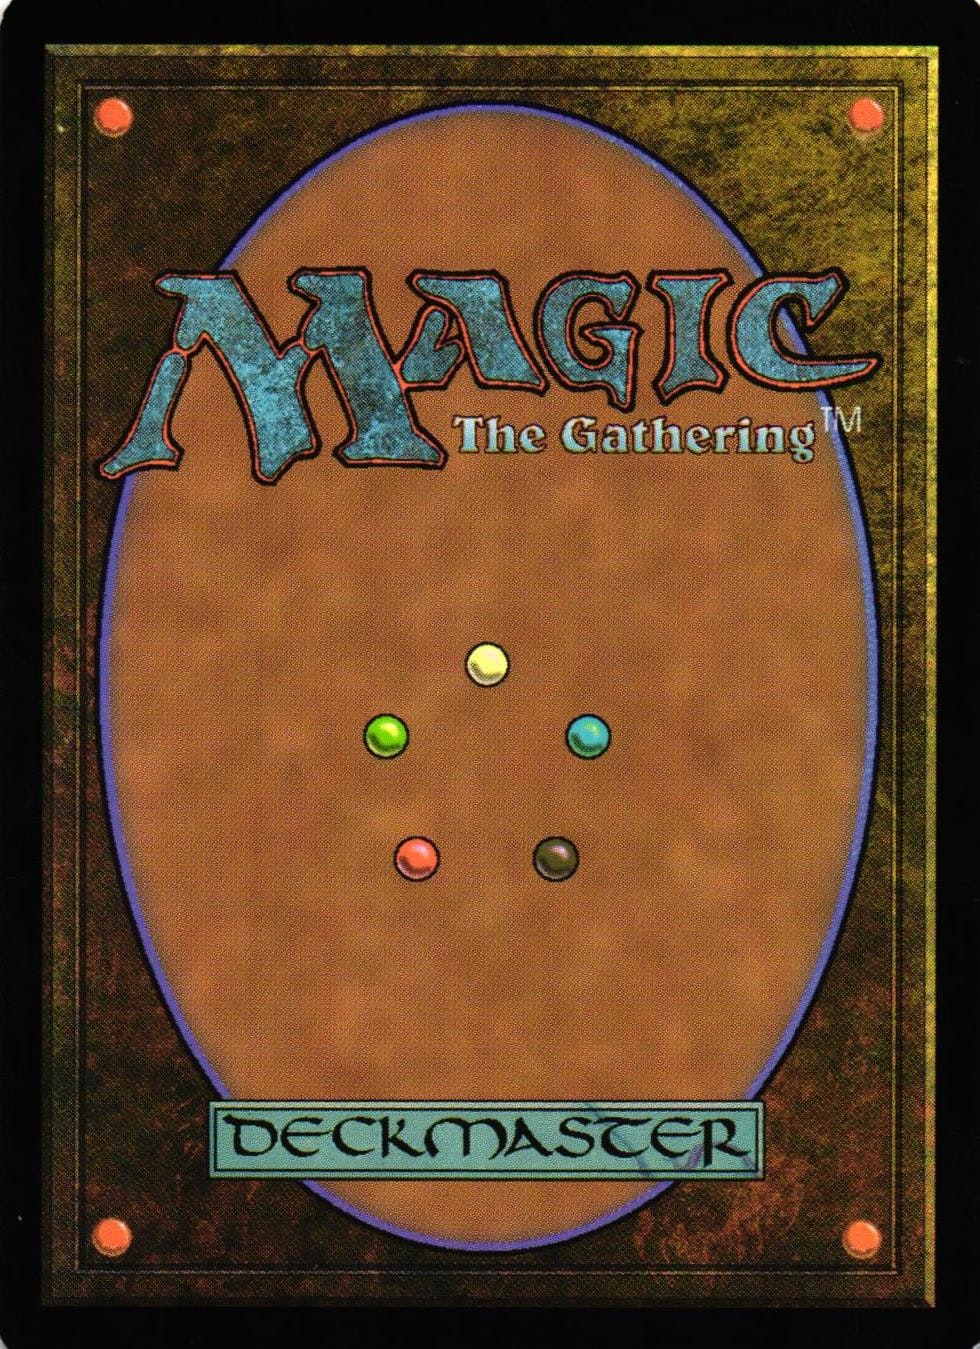 Flamecast Wheel Uncommon 215/249 Theros (THS) Magic the Gathering